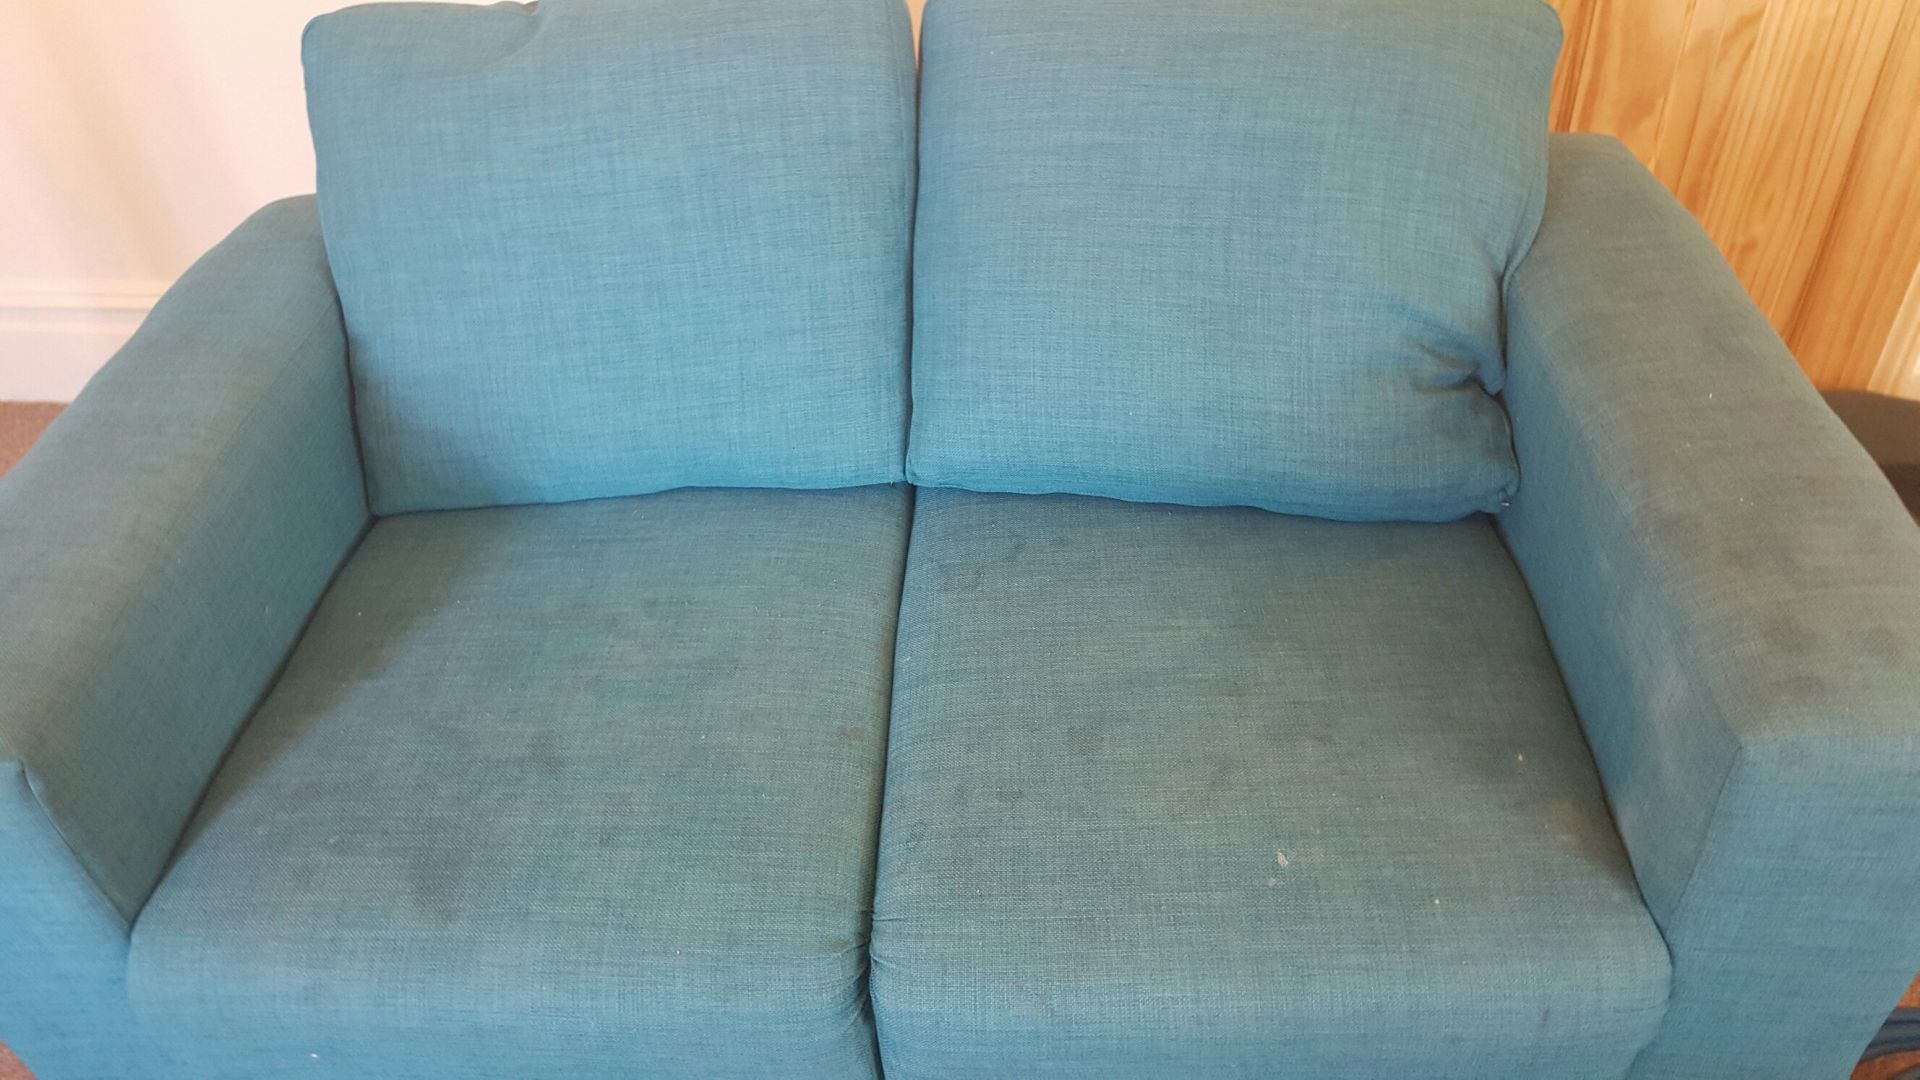 Upholstery & Fabric Cleaning Lincolnshire - Lincs Multi-Clean